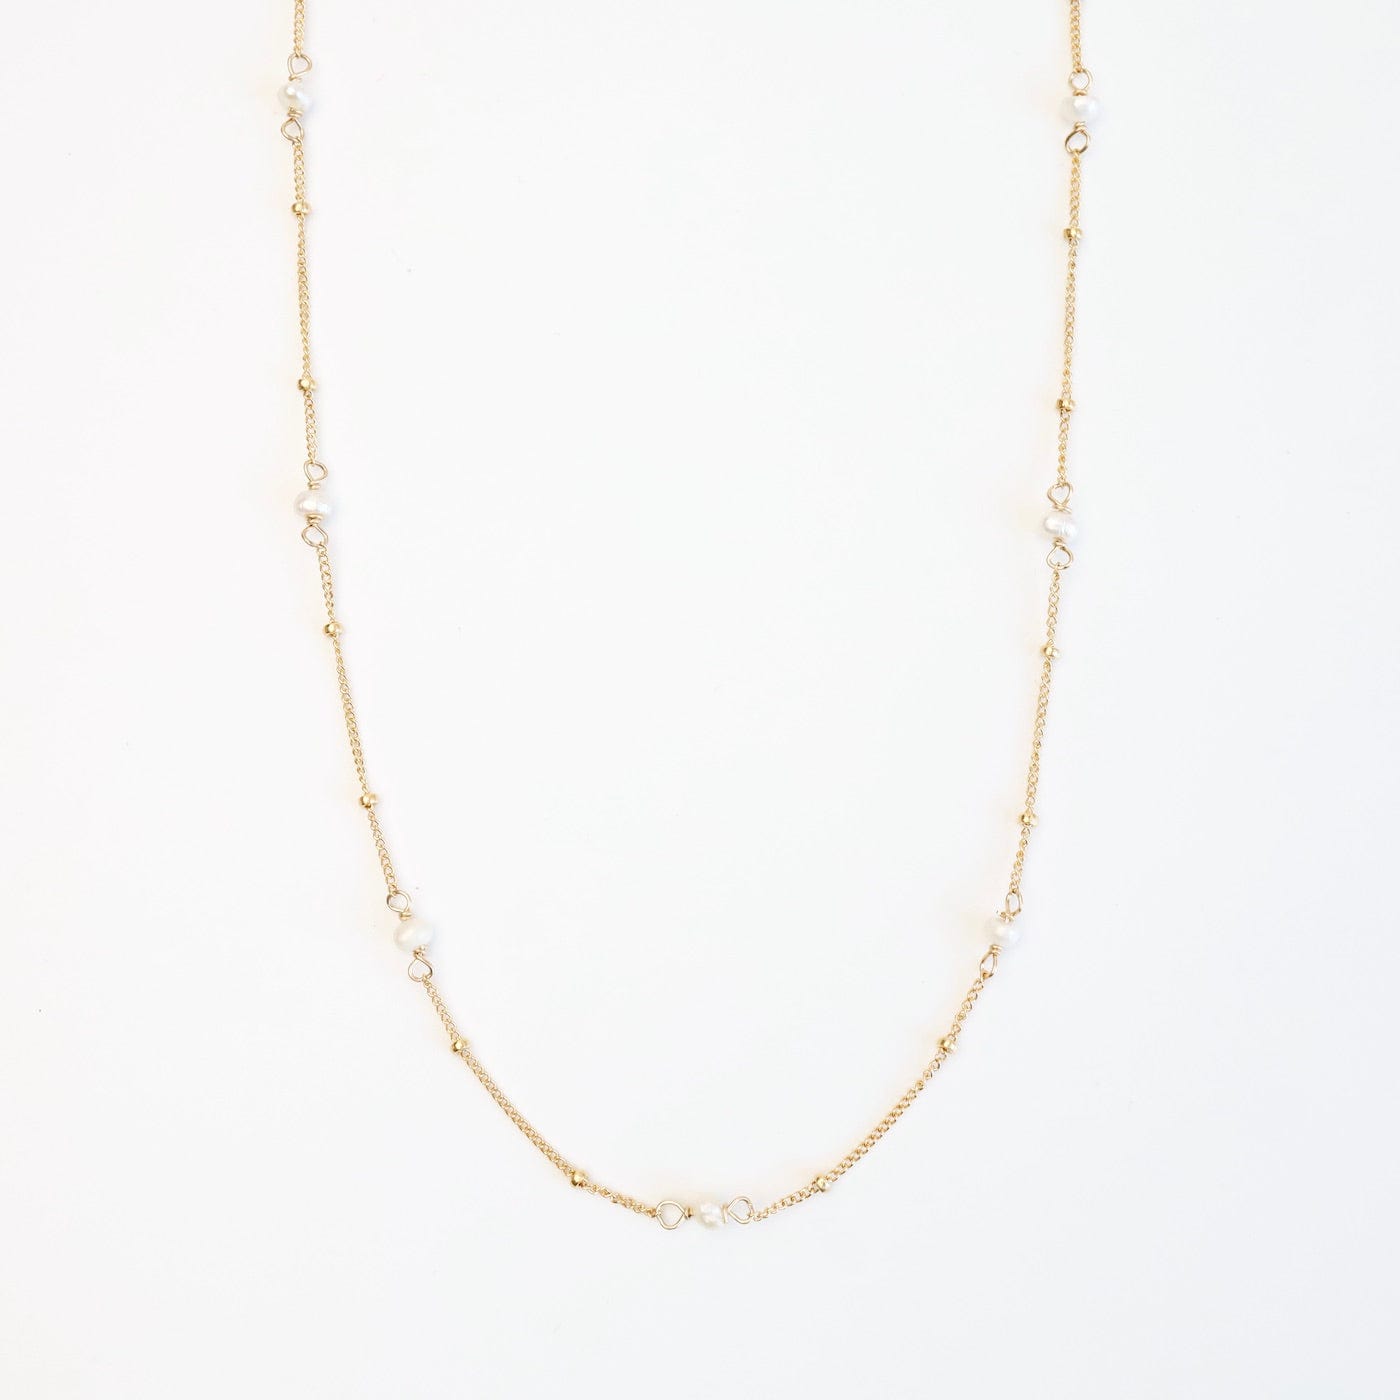 NKL-GF Gold Filled 9 White Pearl Station Necklace